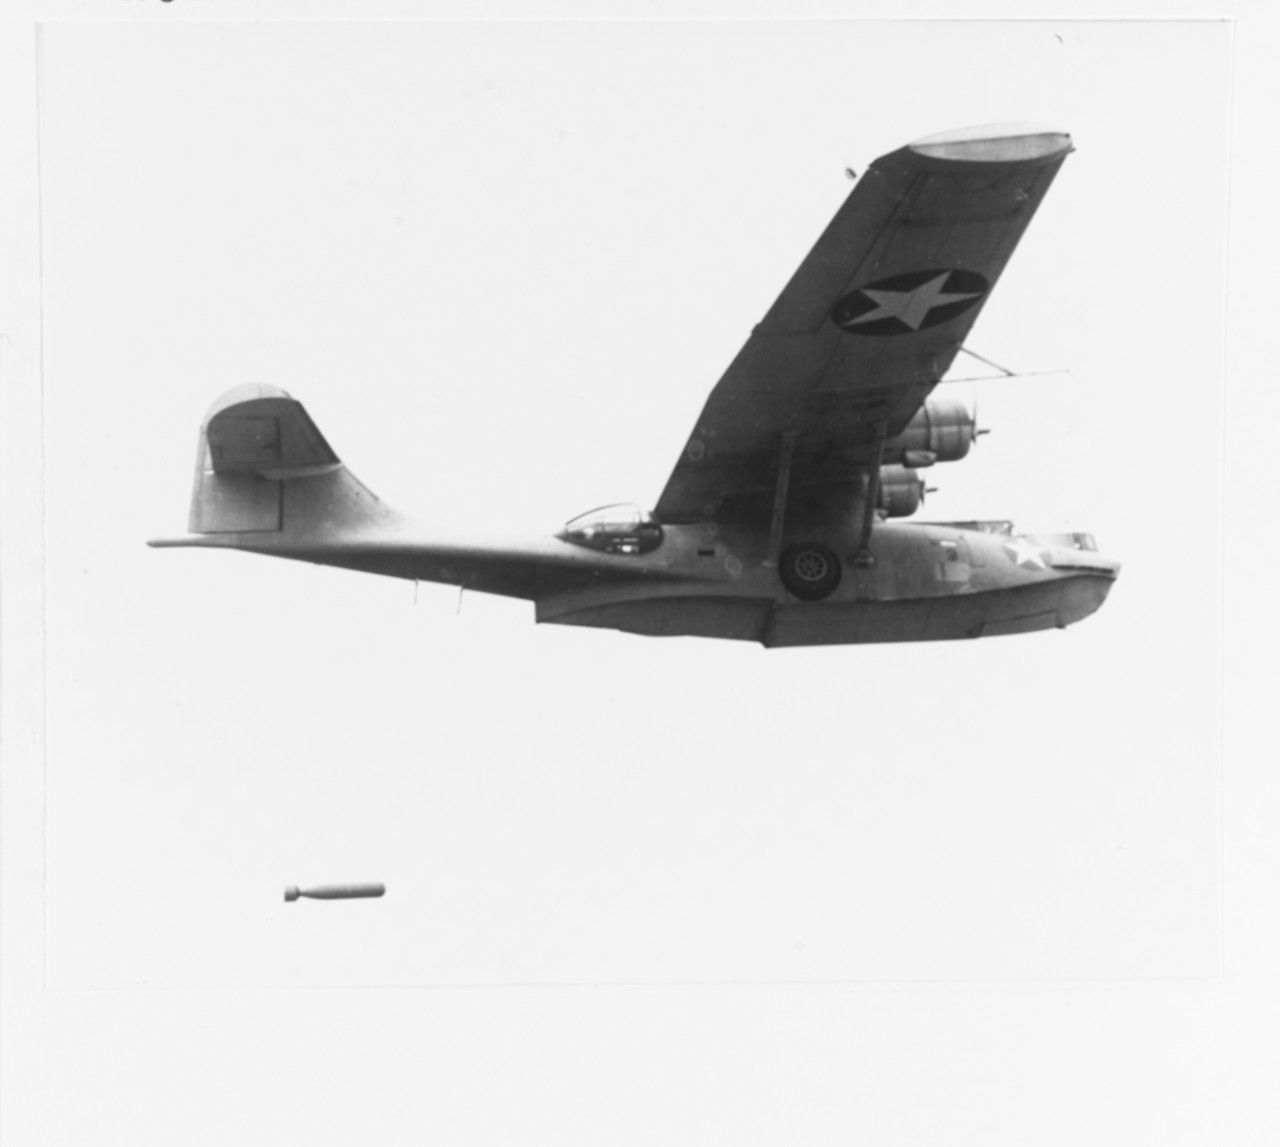 Consolidated PBY-5A "Catalina" patrol plane